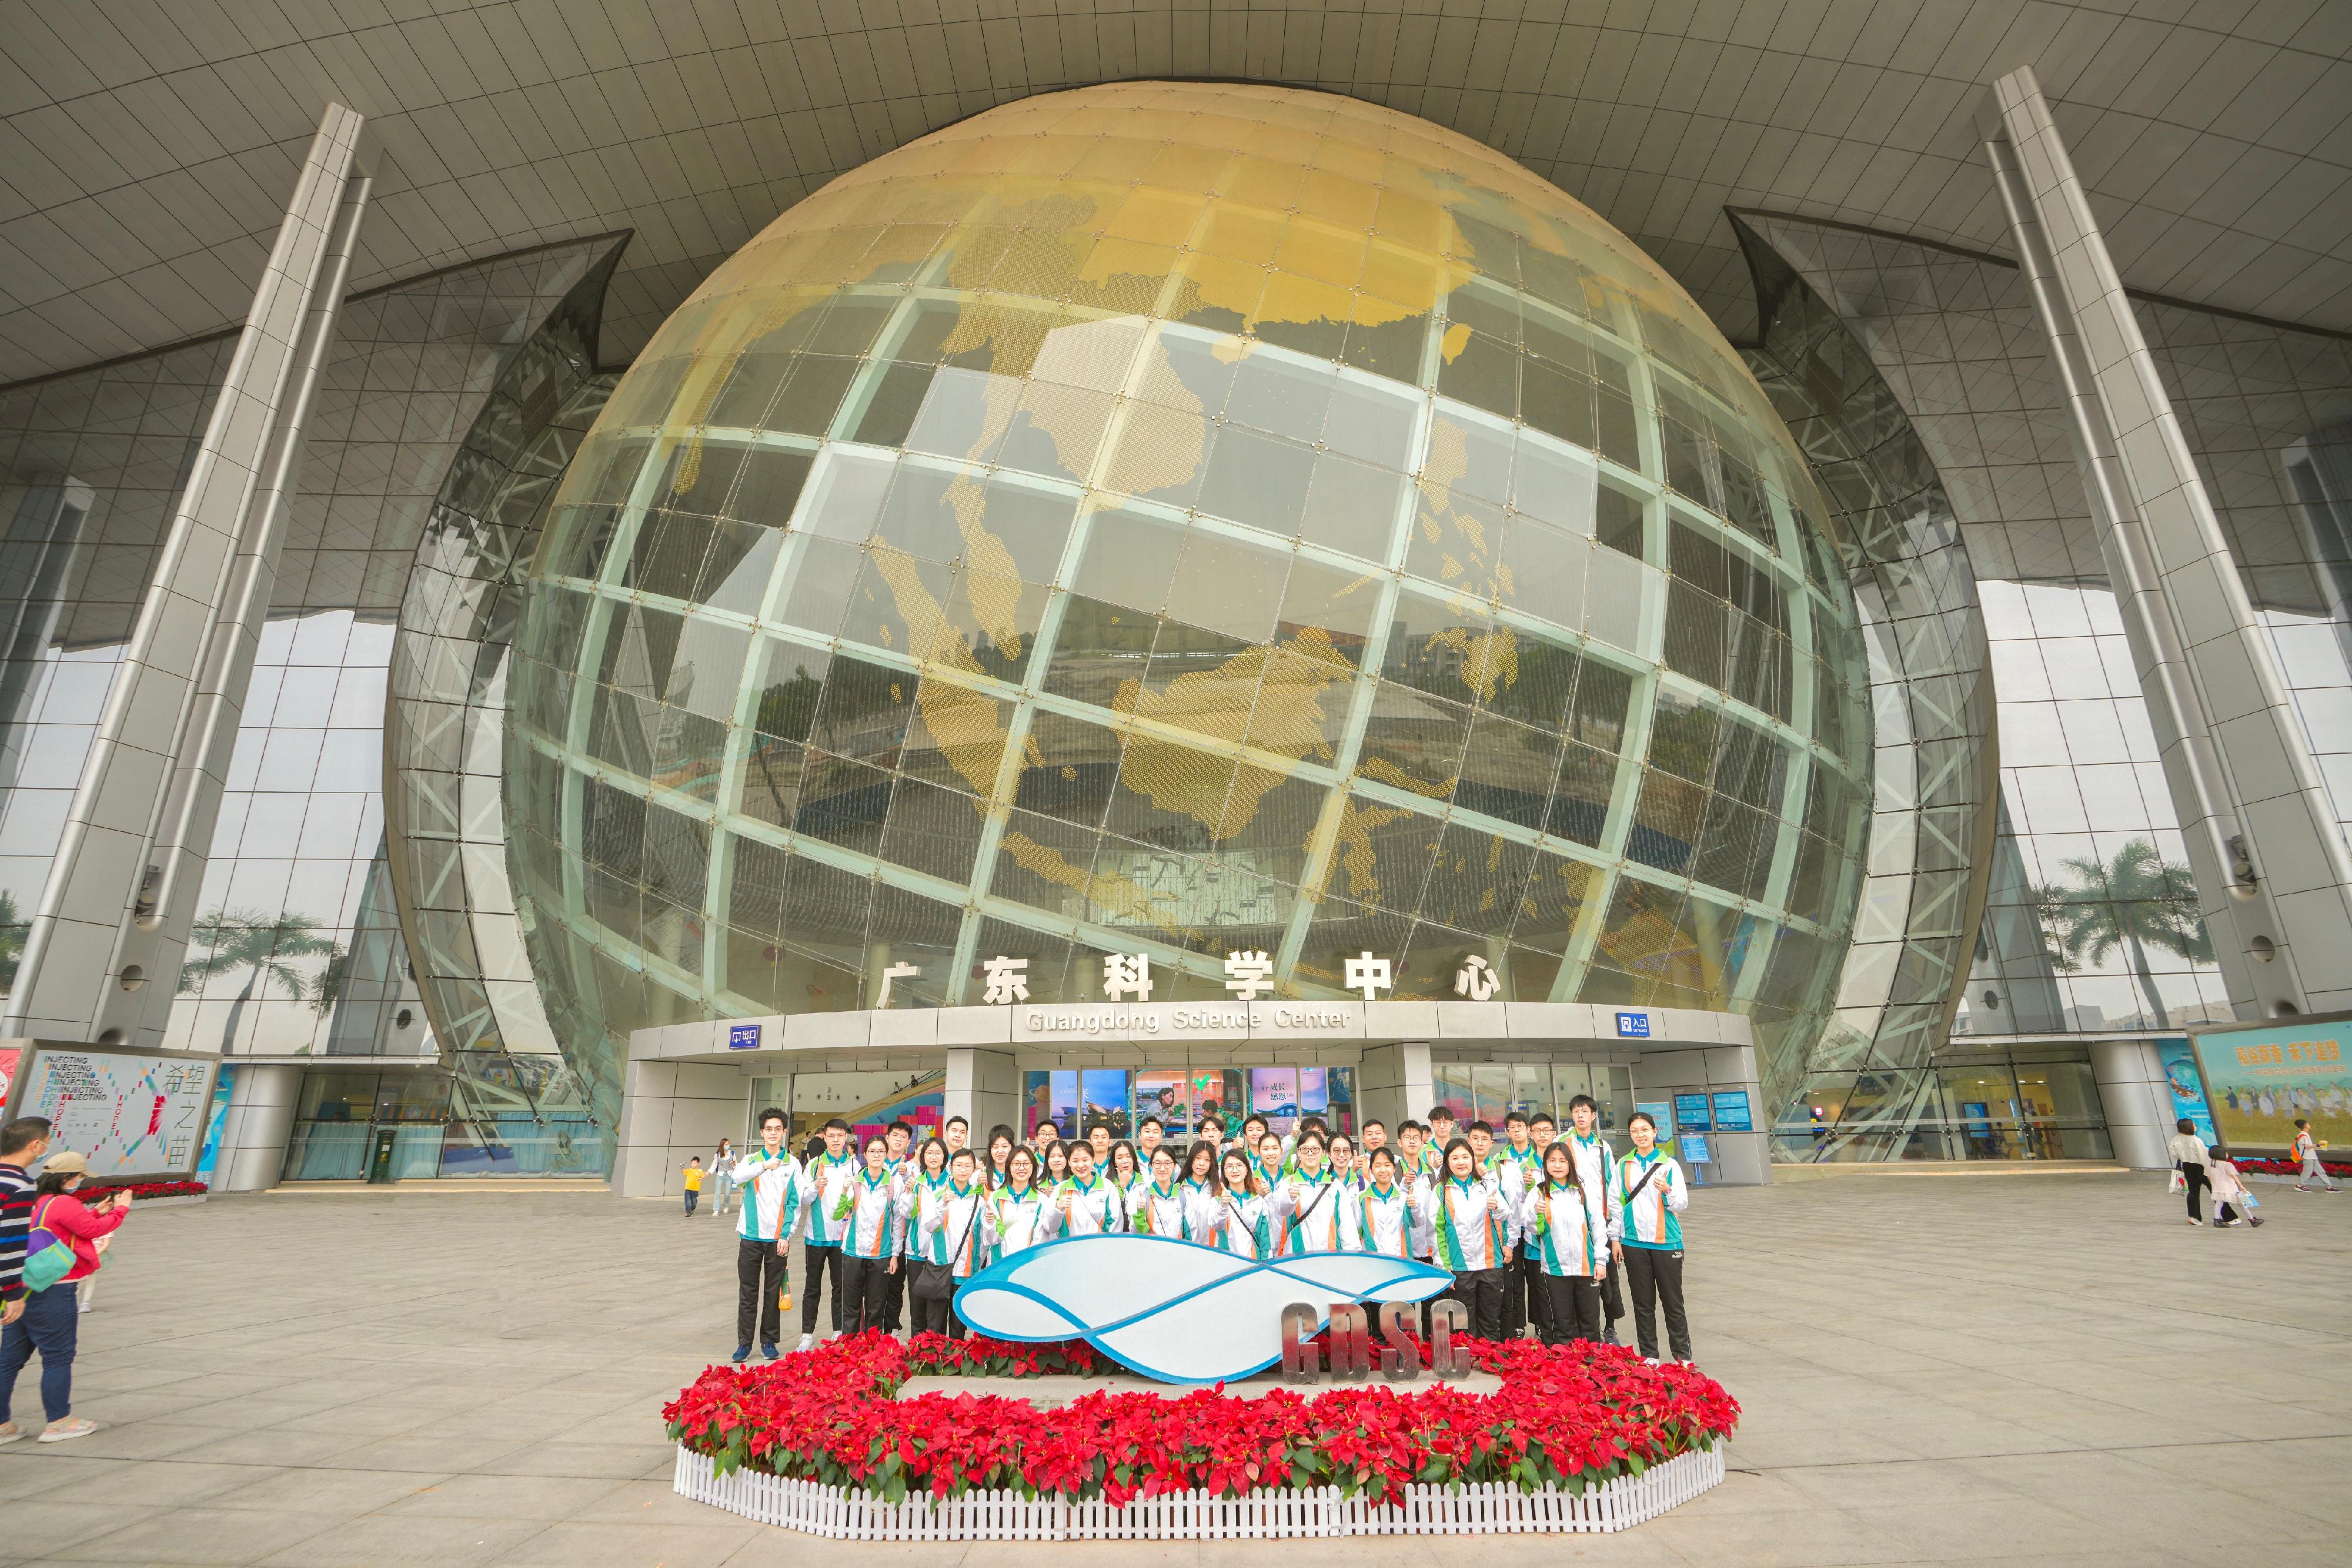 From March 29 to 31, "Customs YES" co-organised the Guangdong Innovation and Technology Exploration Trip with the Greater Bay Area Homeland Youth Community Foundation. Photo shows "Customs YES" members taking a group photo in front of  the Guangdong Science Center.